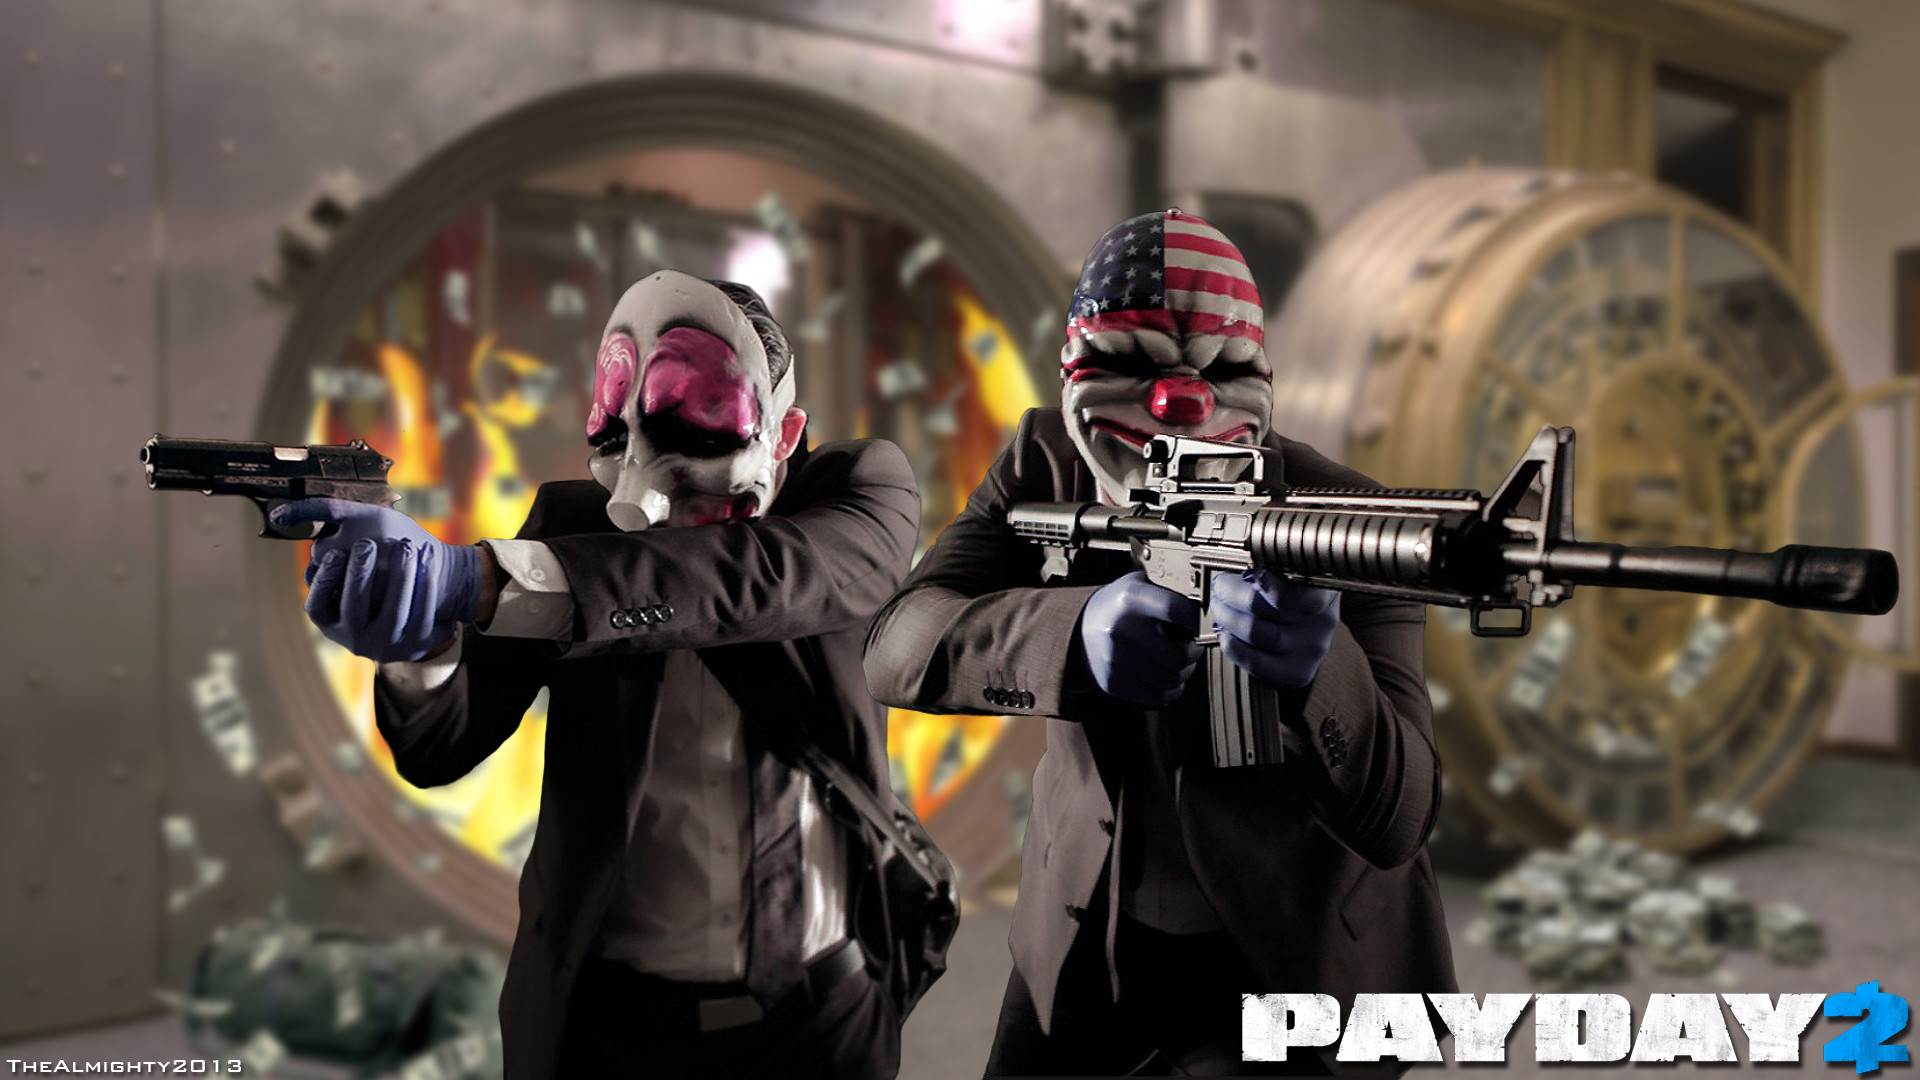 Payday 2 Wallpaper in 1080P HD « GamingBolt.com: Video Game News